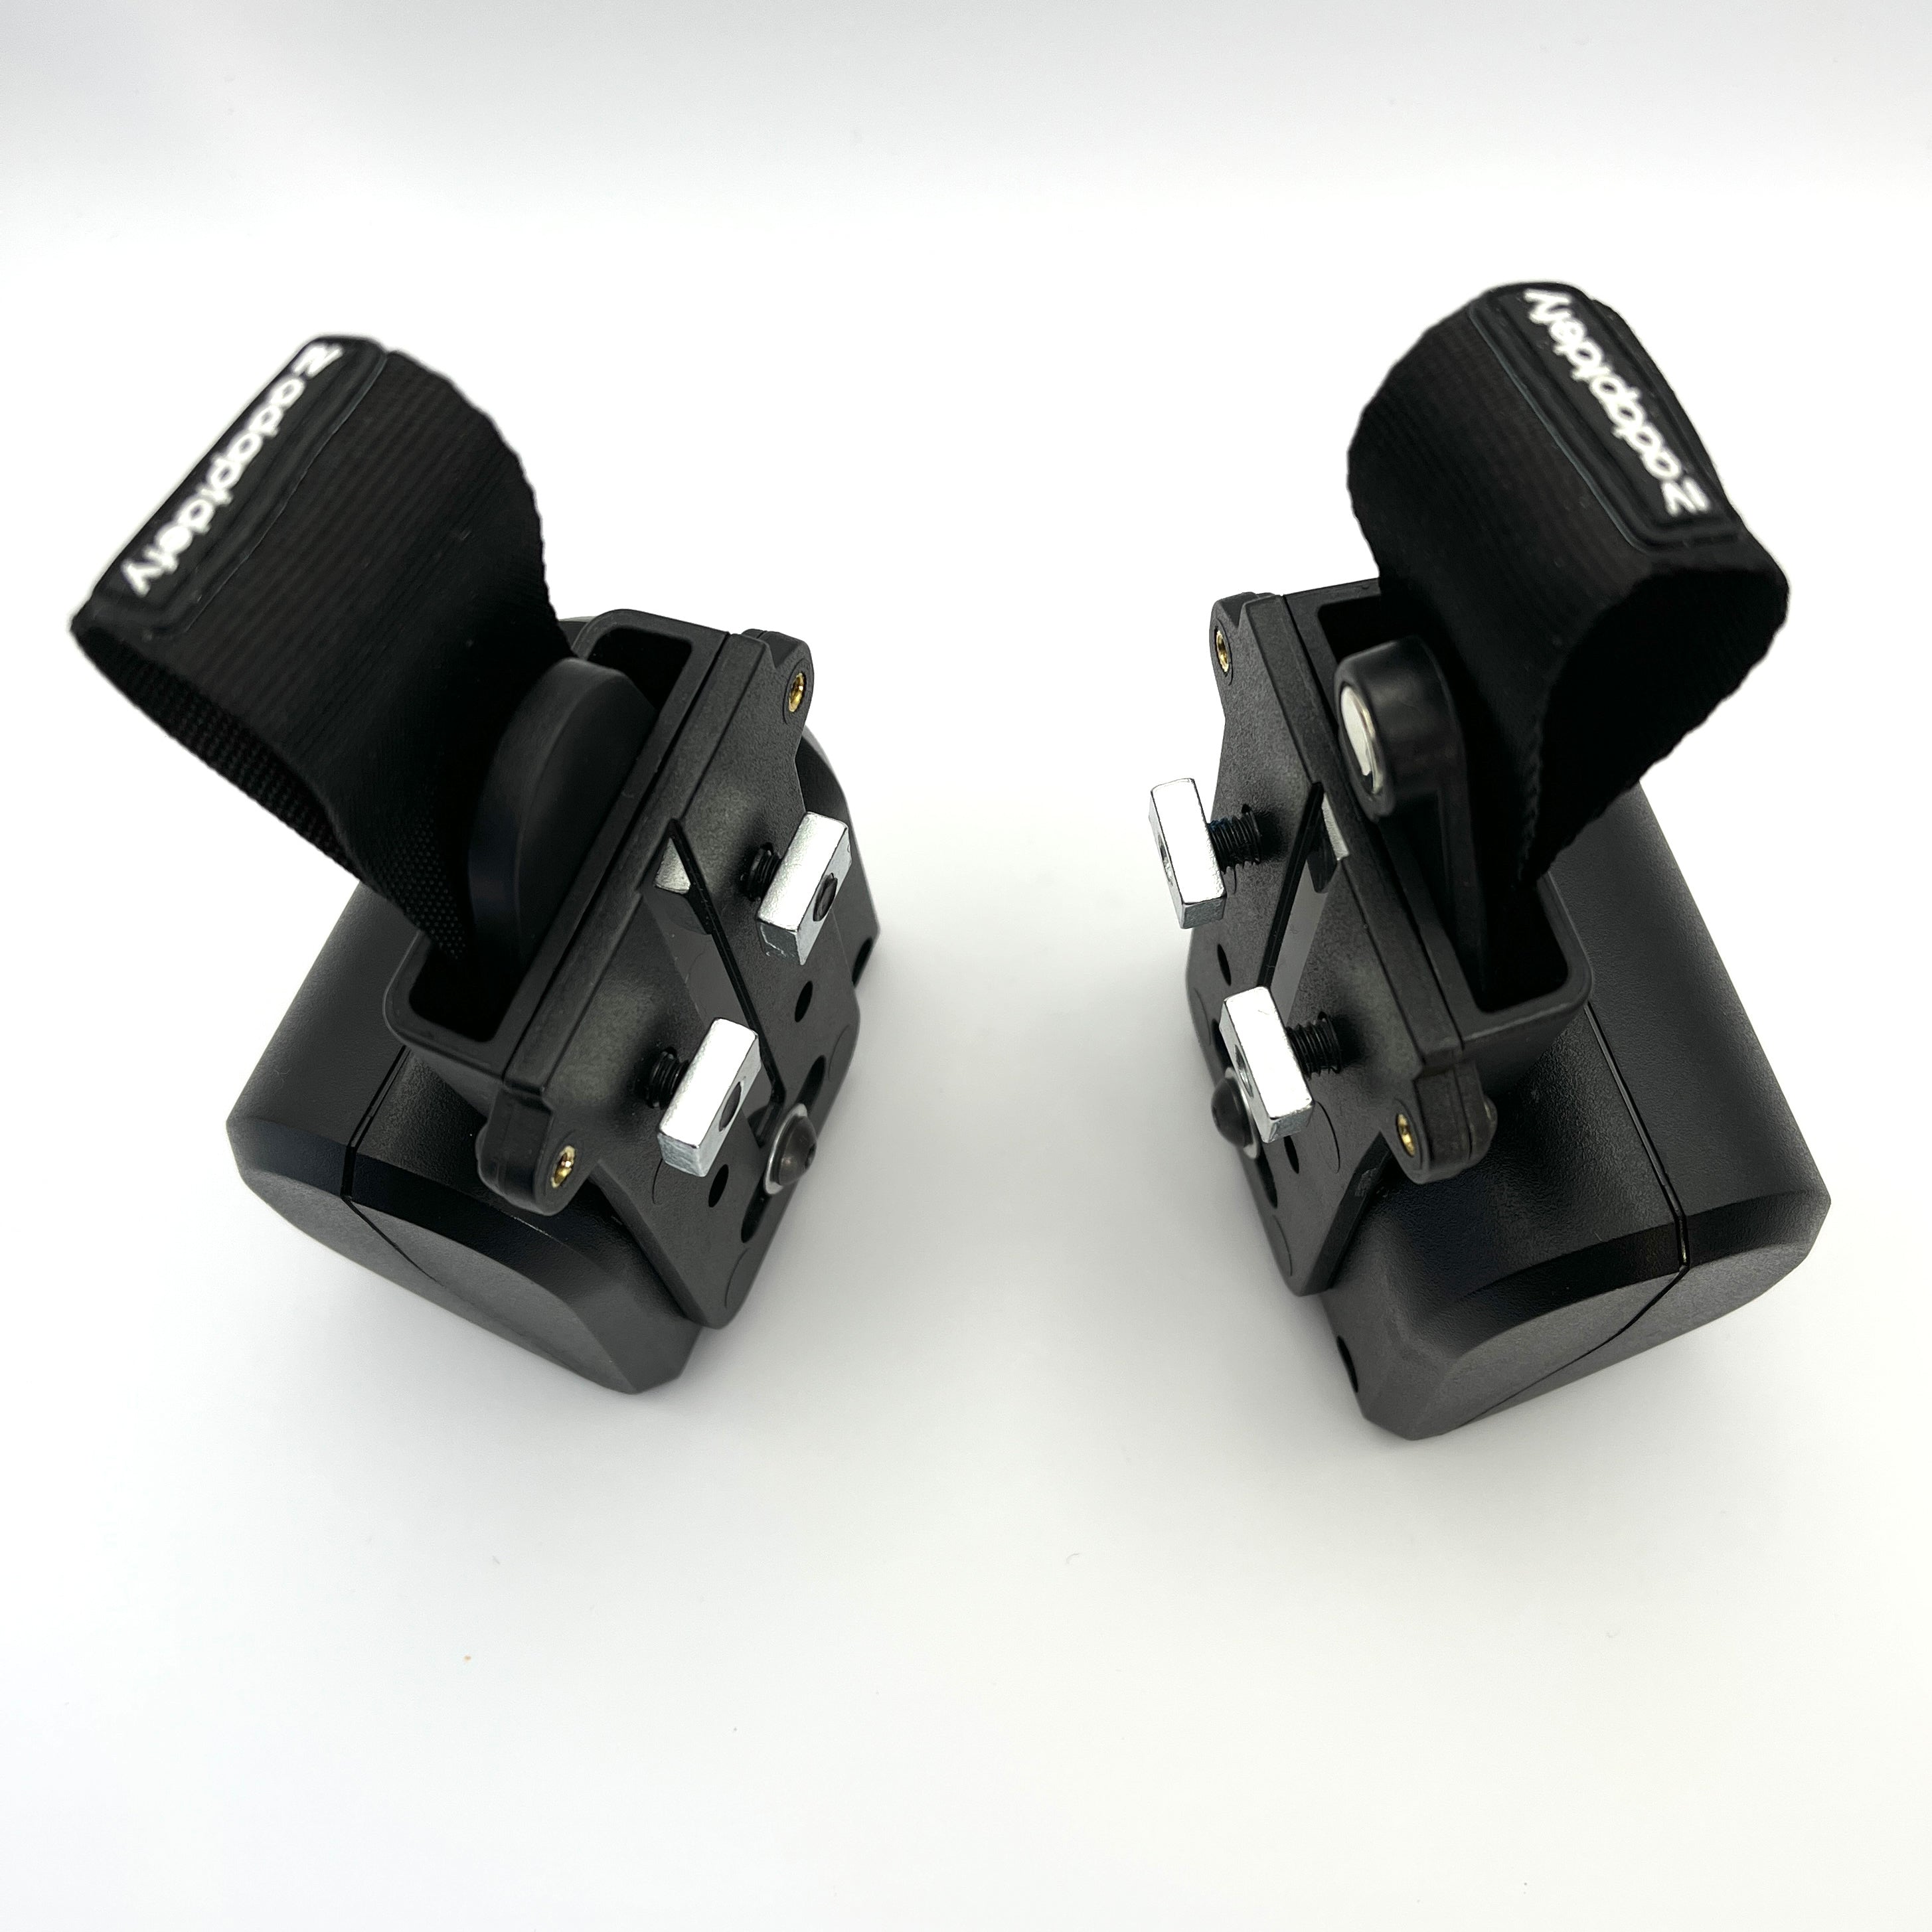 NEW Quantum Rehab Backpack Clips for Power Wheelchair ACC147774 Sets of 2*  #D084